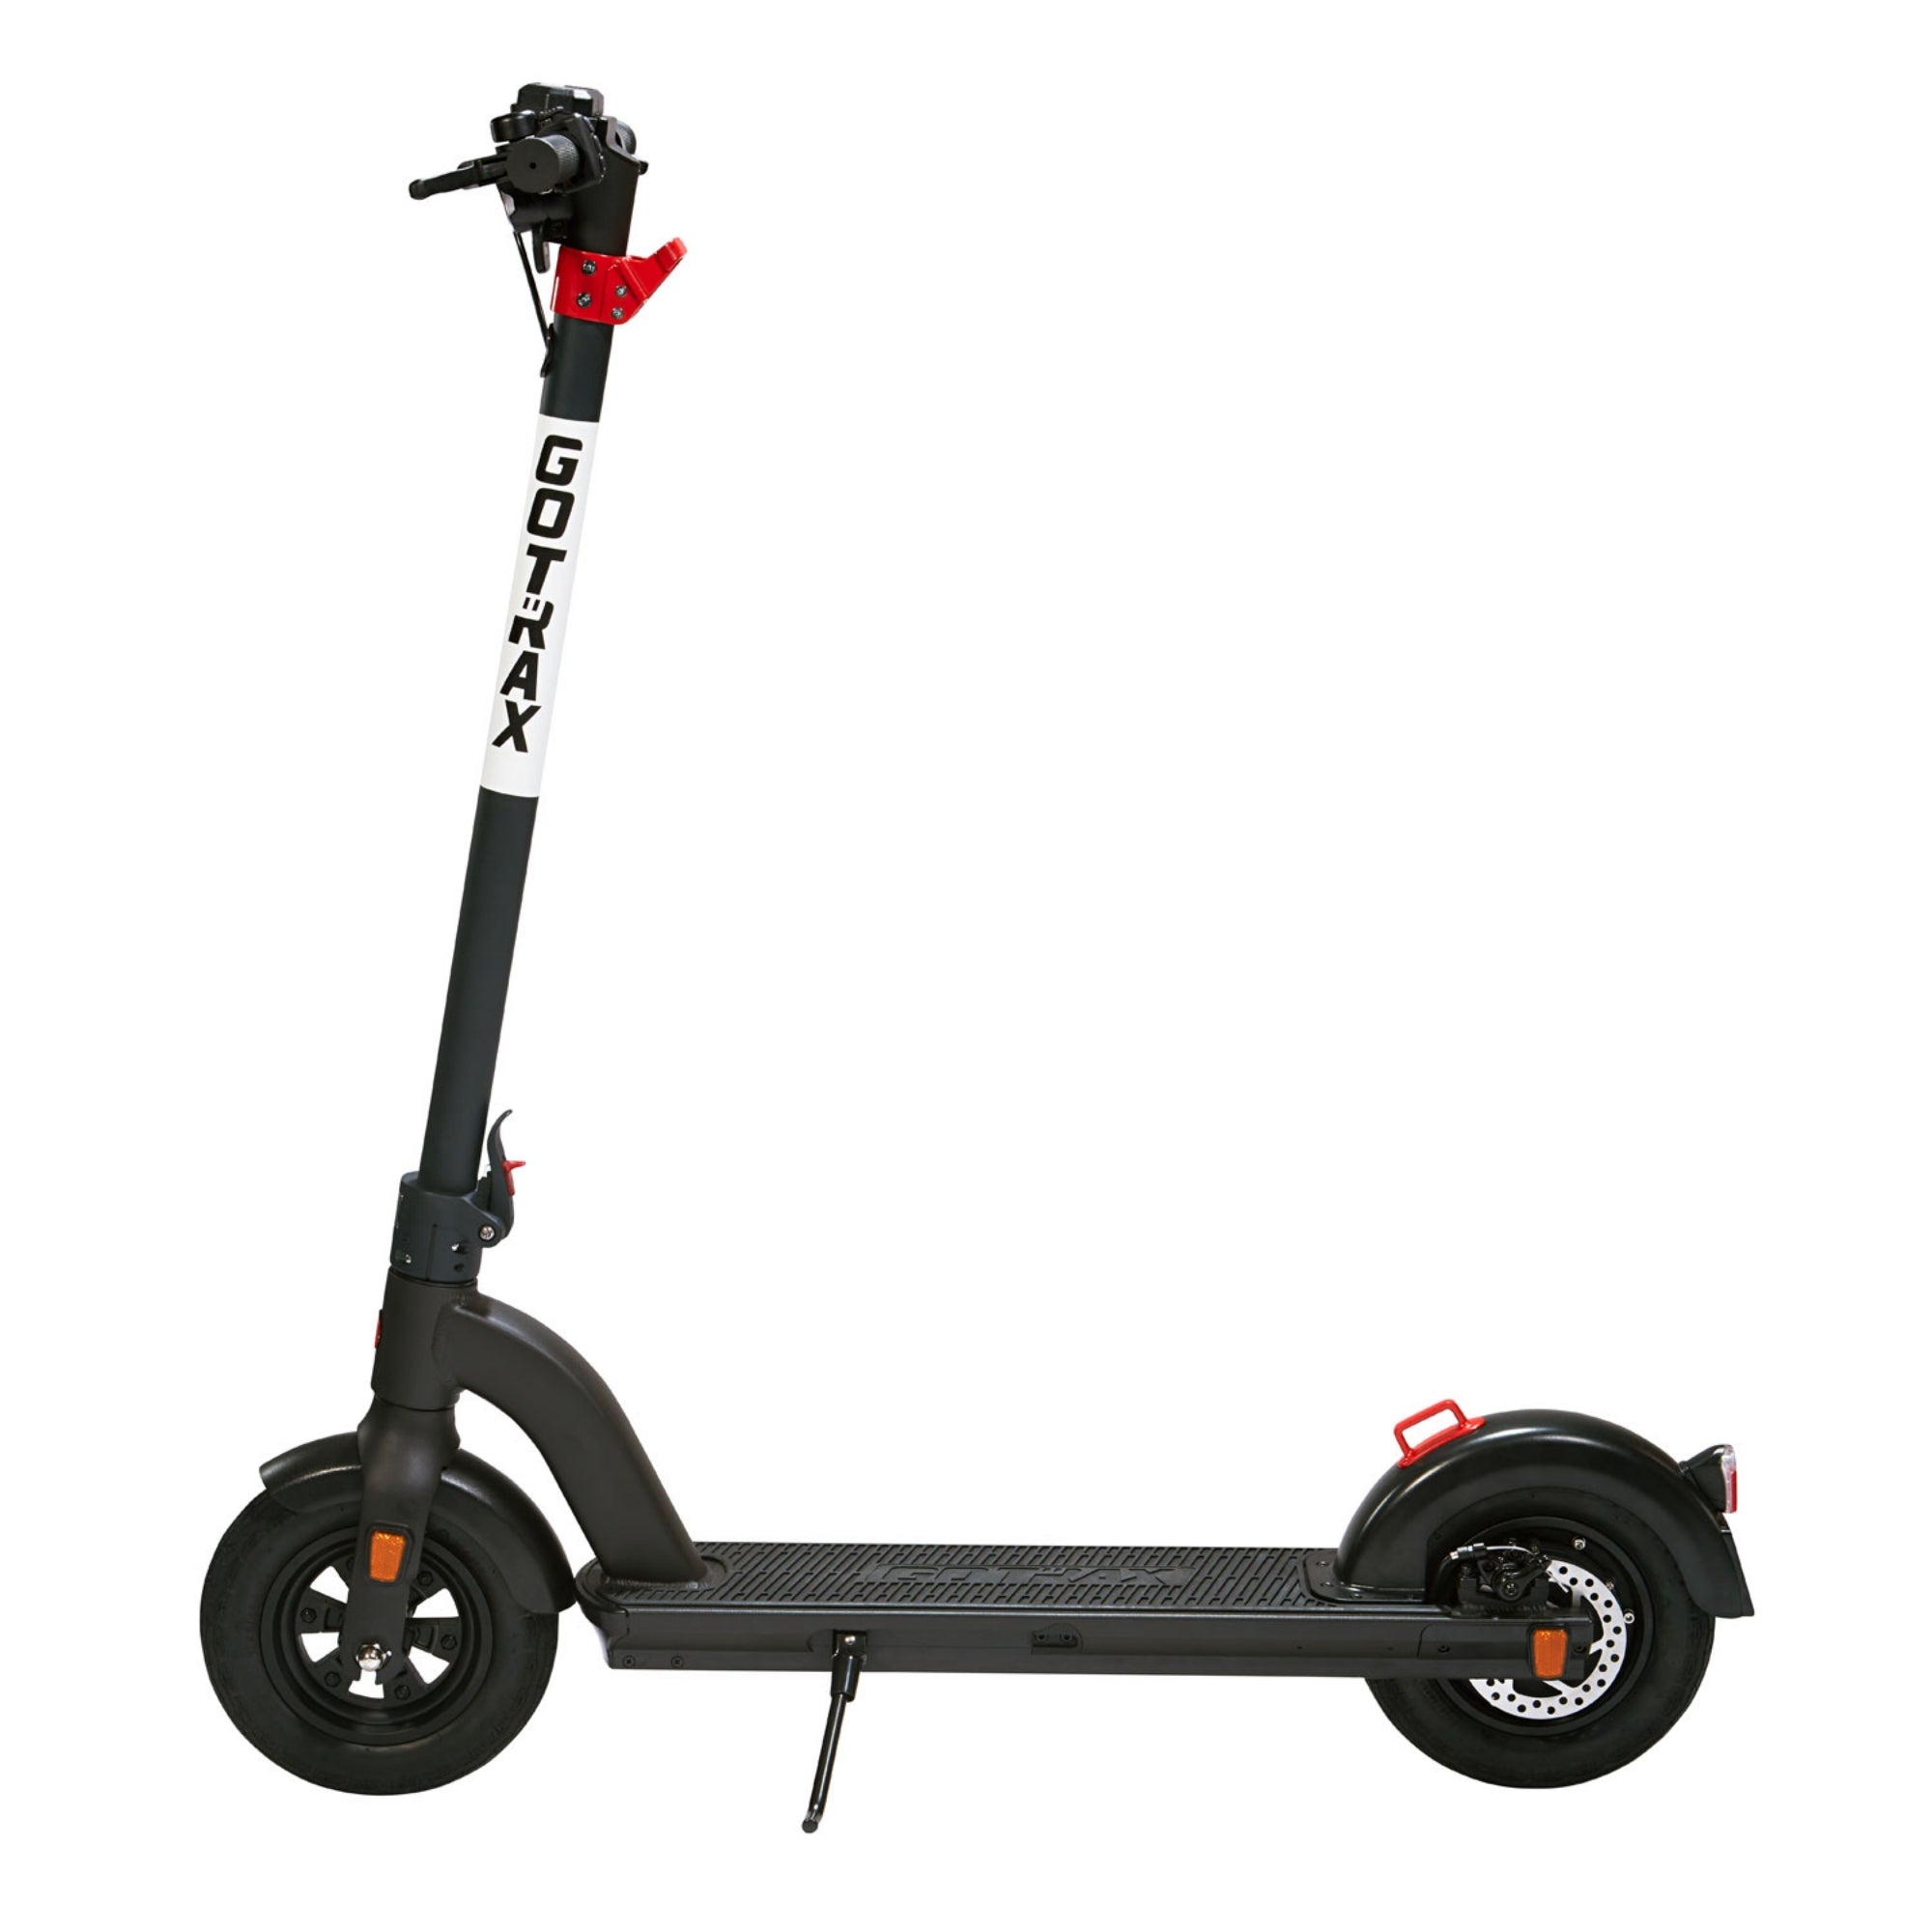 Refurbished G4 Electric Scooter - GOTRAX